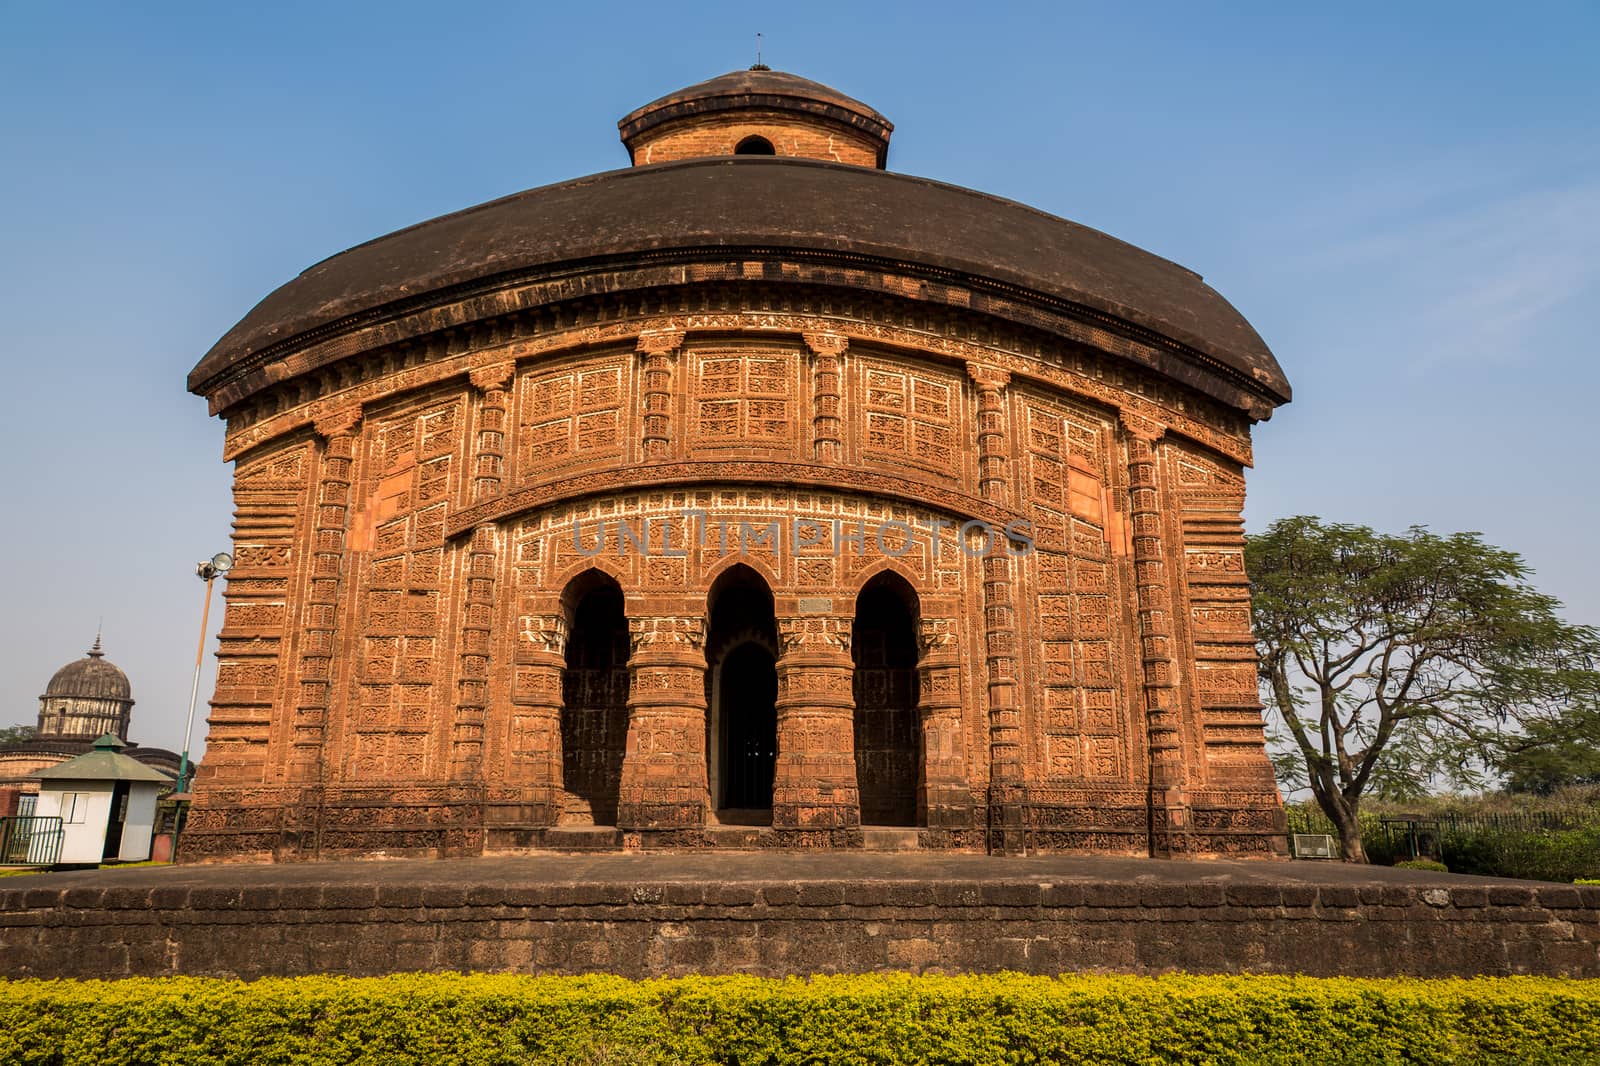 Front face of Jorbangla temple showing beautiful terracotta carvings on the walls.